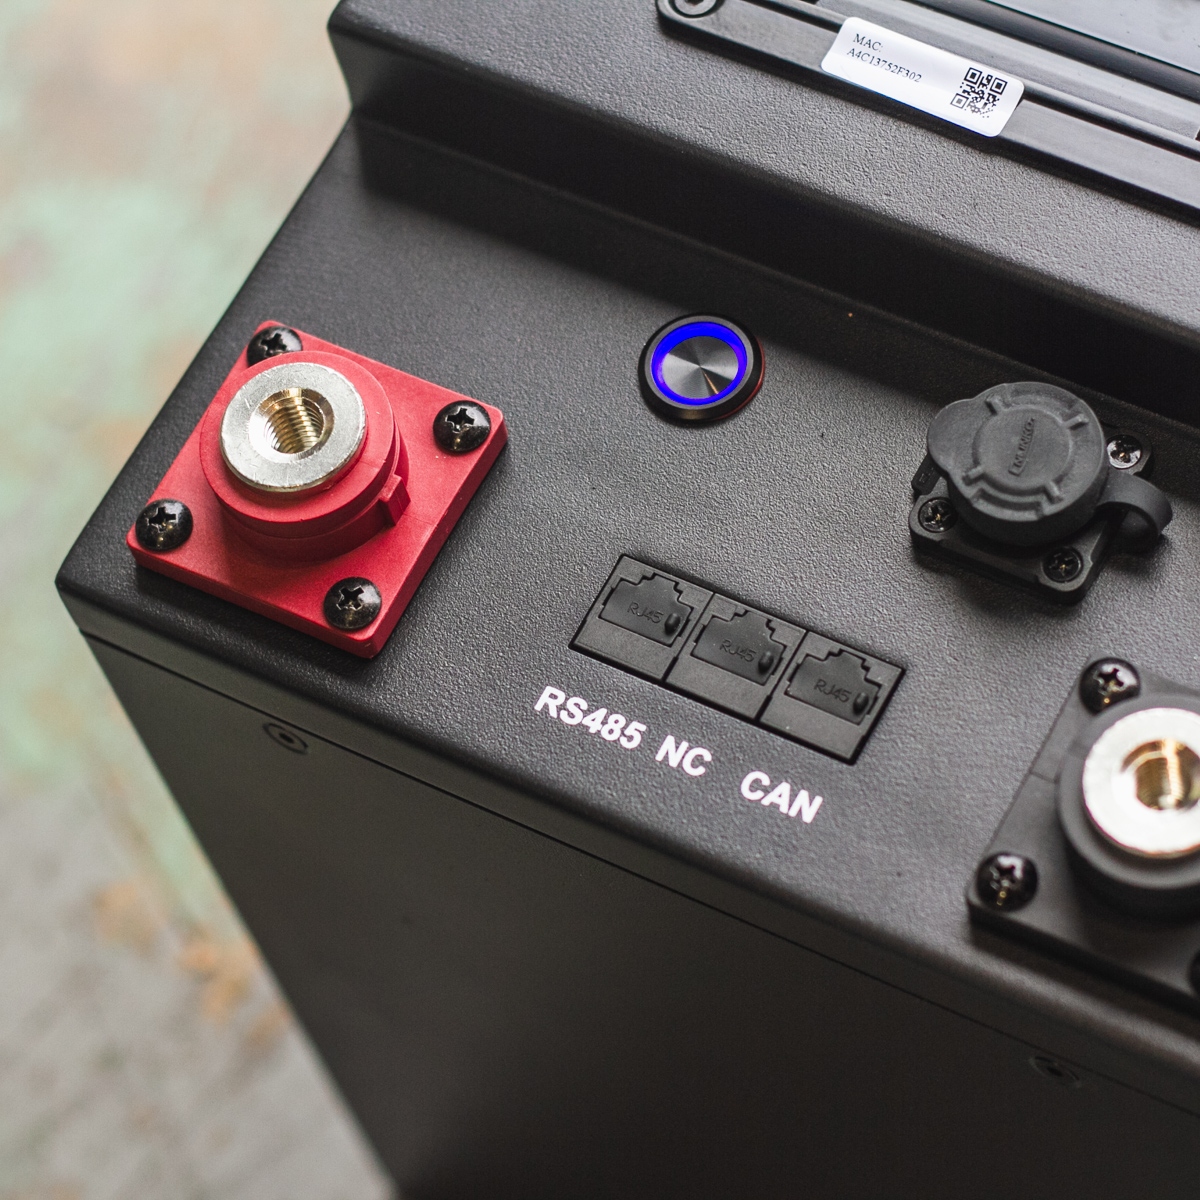 Close-up of black electronic equipment from the Fogstar Drift PRO 300Ah - 12V lithium leisure battery, featuring labeled ports and a red connector, highlighting RS485, NC, and CAN ports.